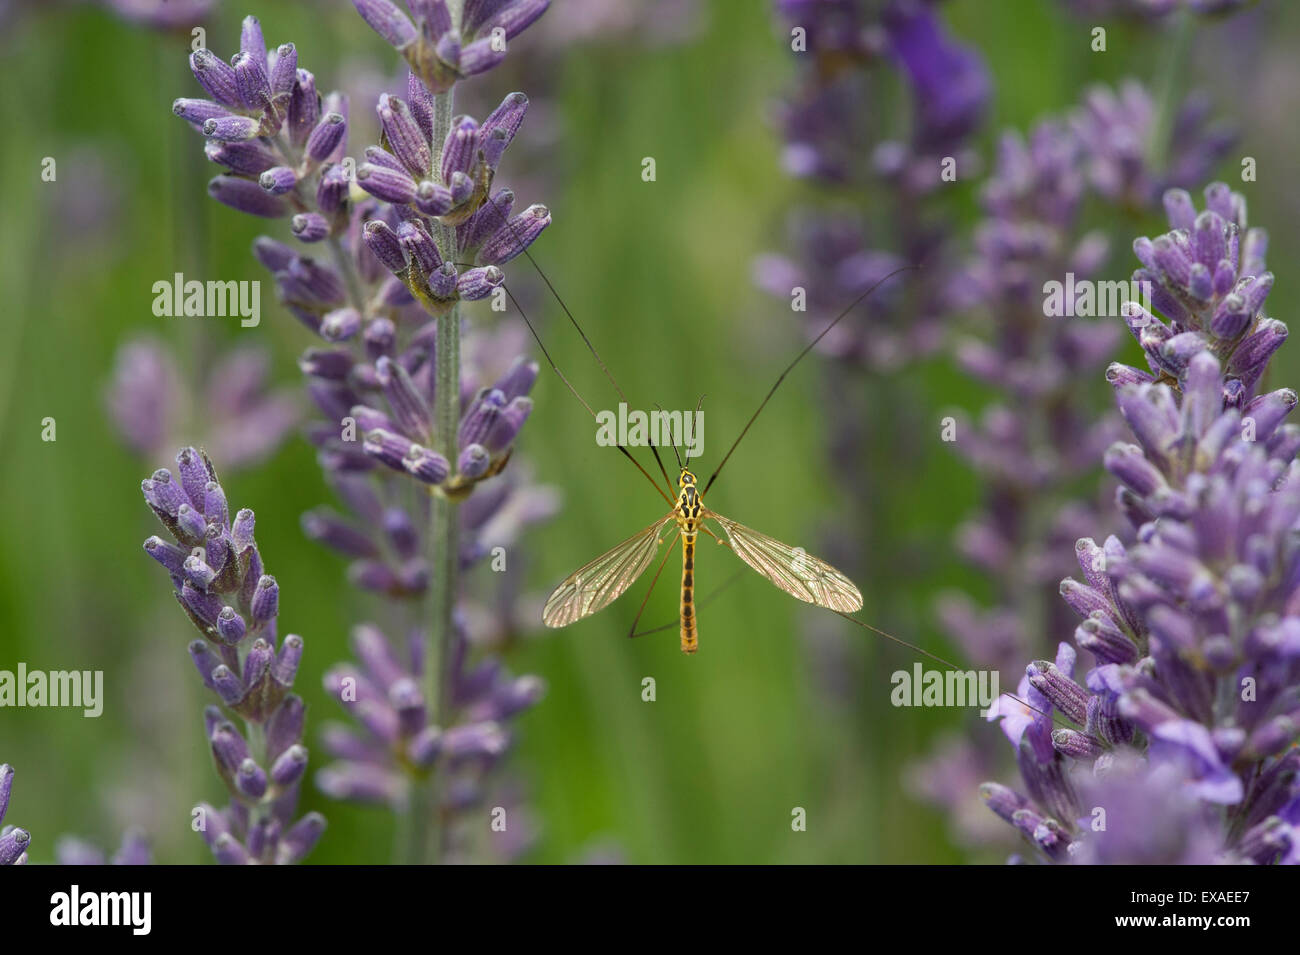 A Spotted Cranefly (Nephrotoma appendiculata) on lavender. Stock Photo